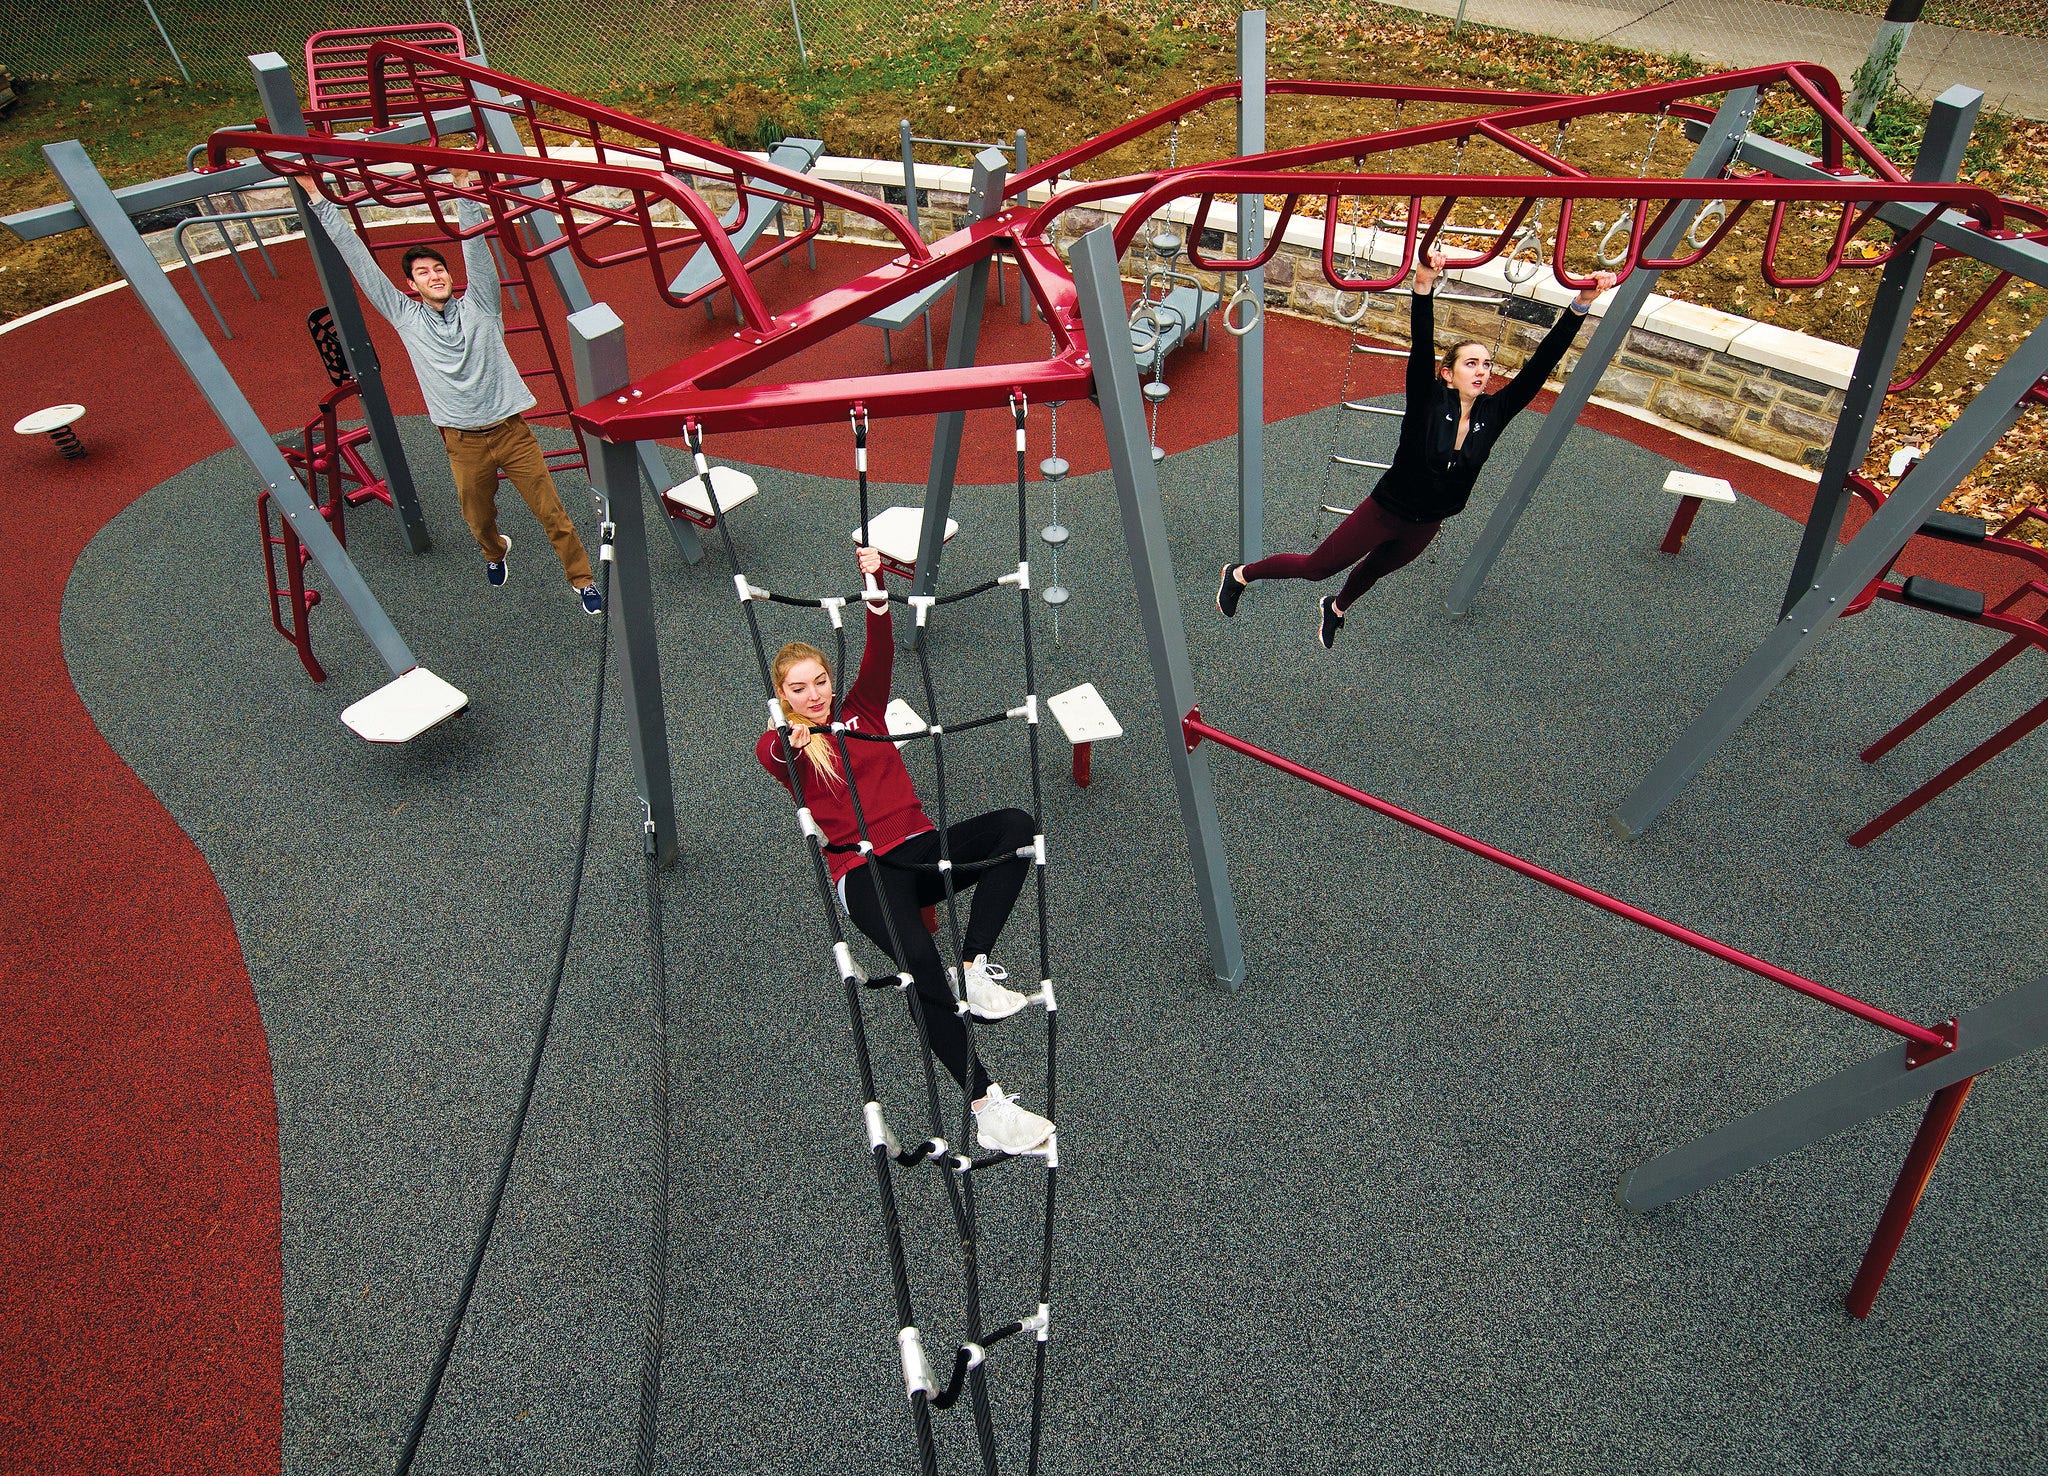 Students at Virginia Tech exercise on GameTime outdoor fitness equipment